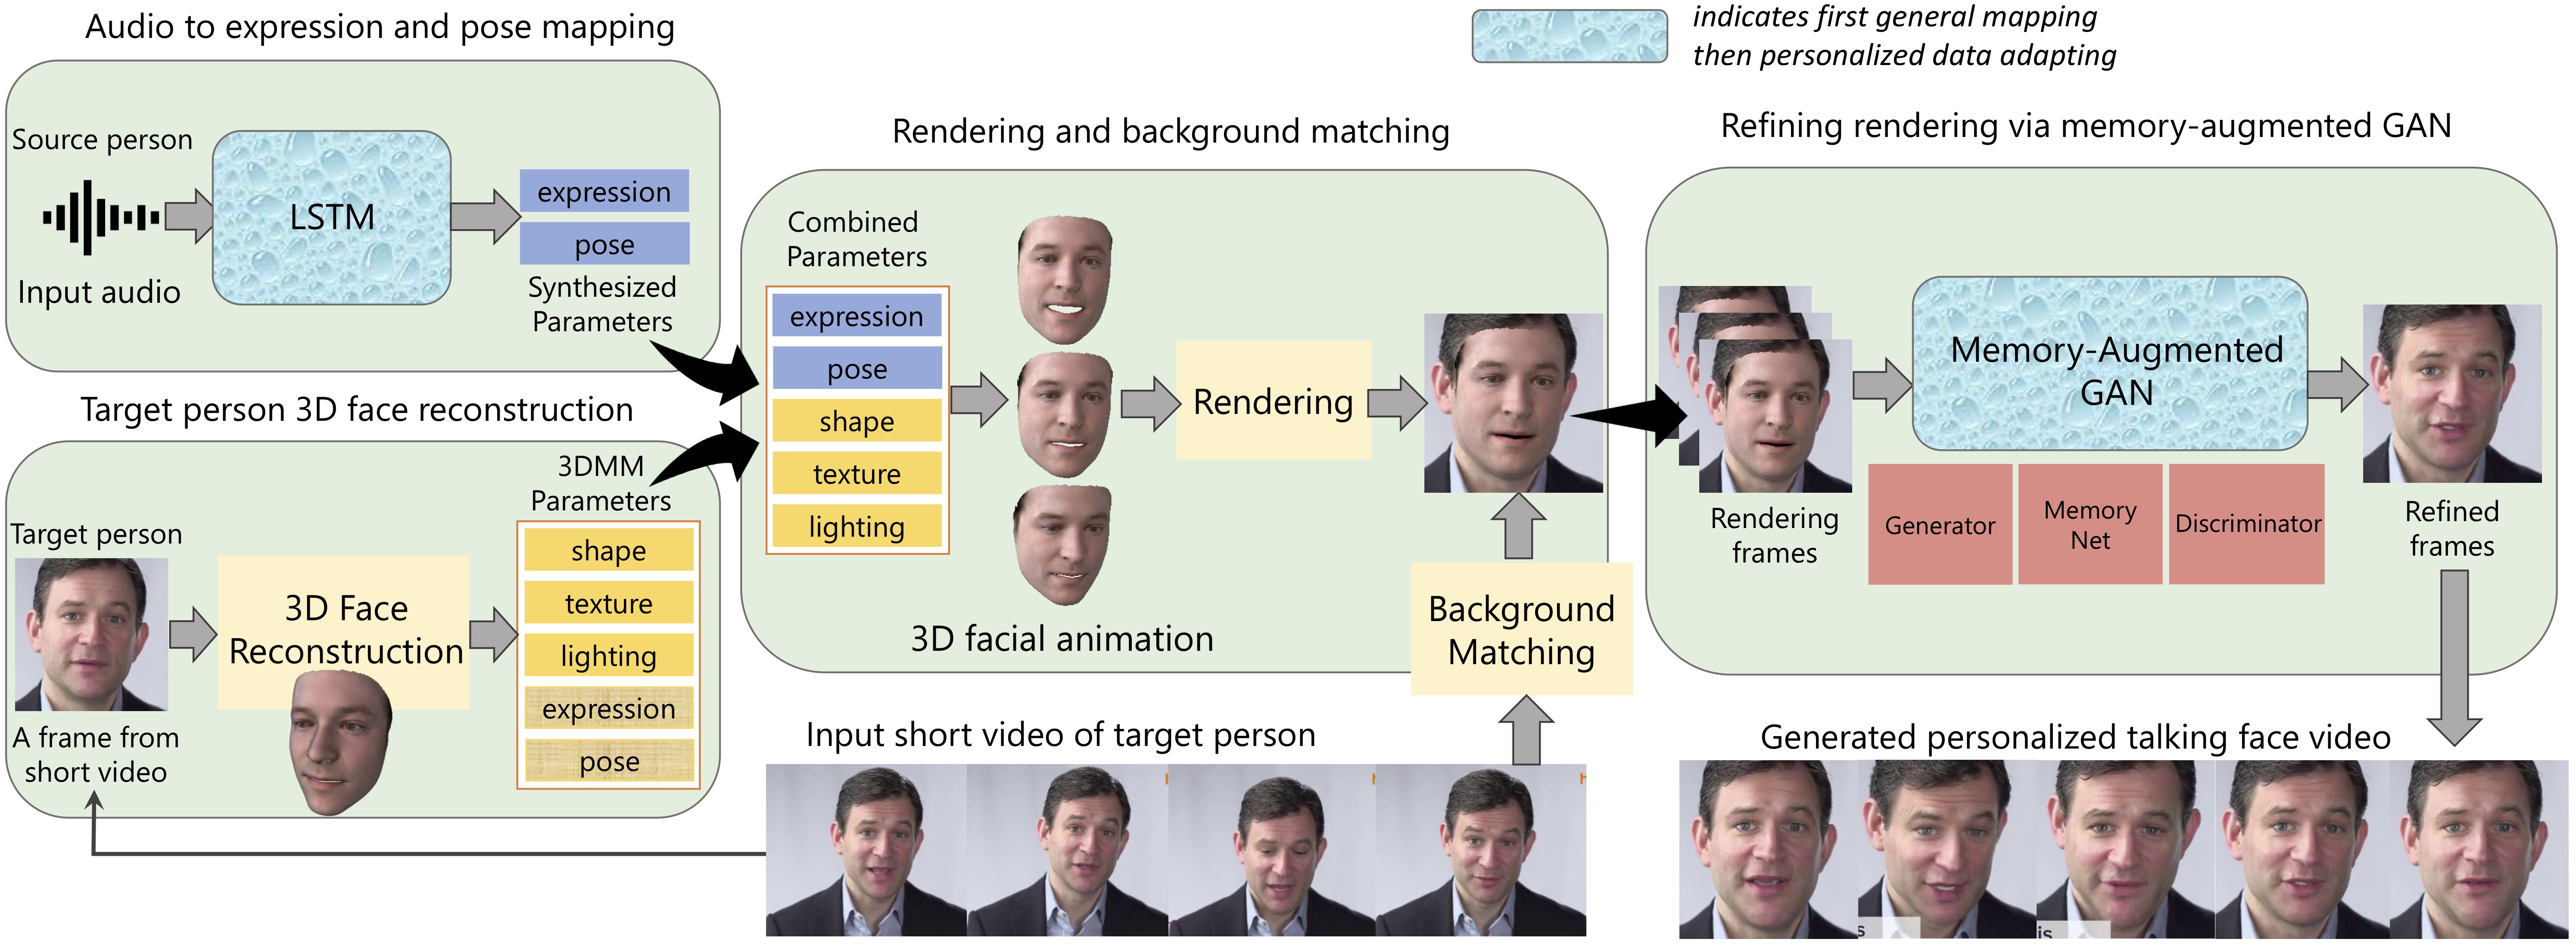 Audio-driven Talking Face Video Generation with Learning-based Personalized  Head Pose | Papers With Code